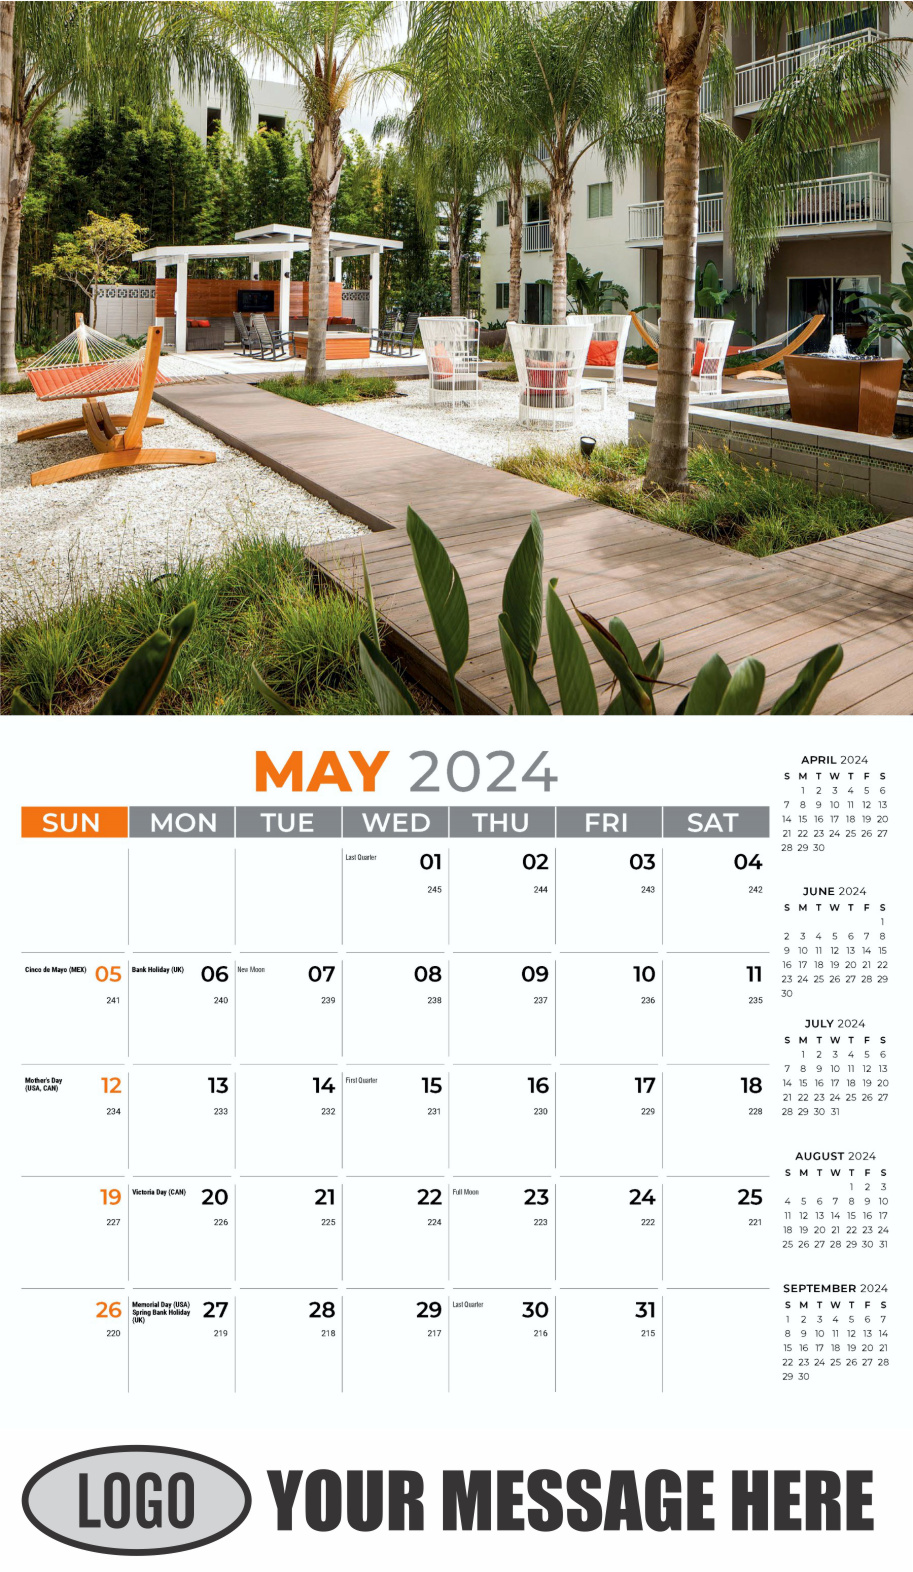 Luxury Homes 2024 Real Estate Agent Promotional Wall Calendar - May